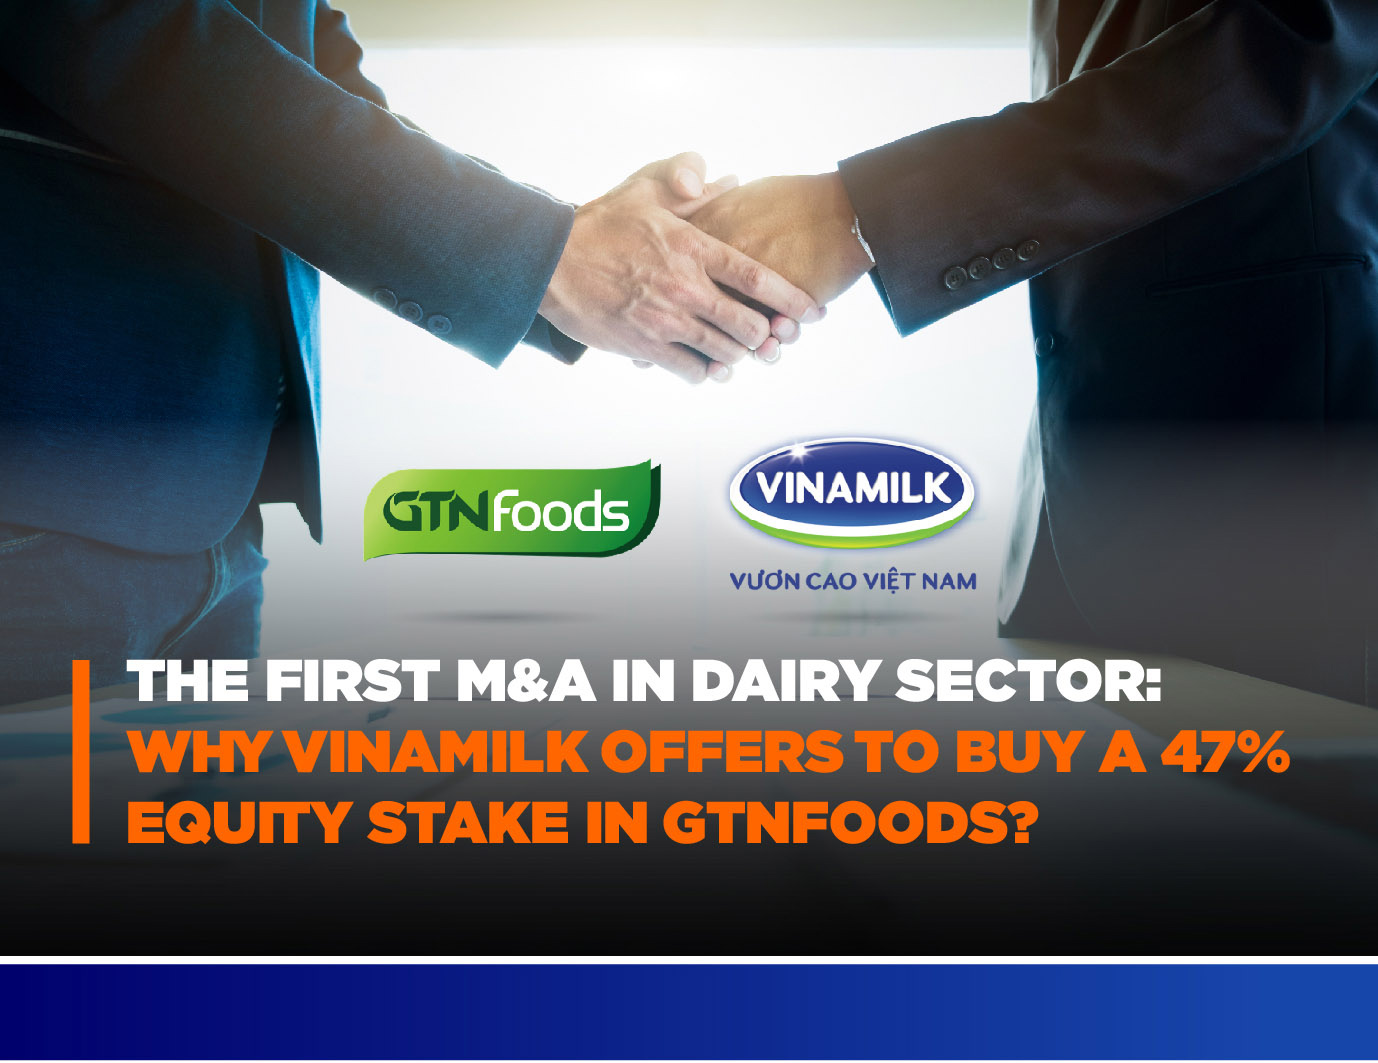 THE FIRST M&A IN DAIRY SECTOR : WHY VINAMILK OFFERS TO BUY A 47% EQUITY STAKE IN GTNFOODS?